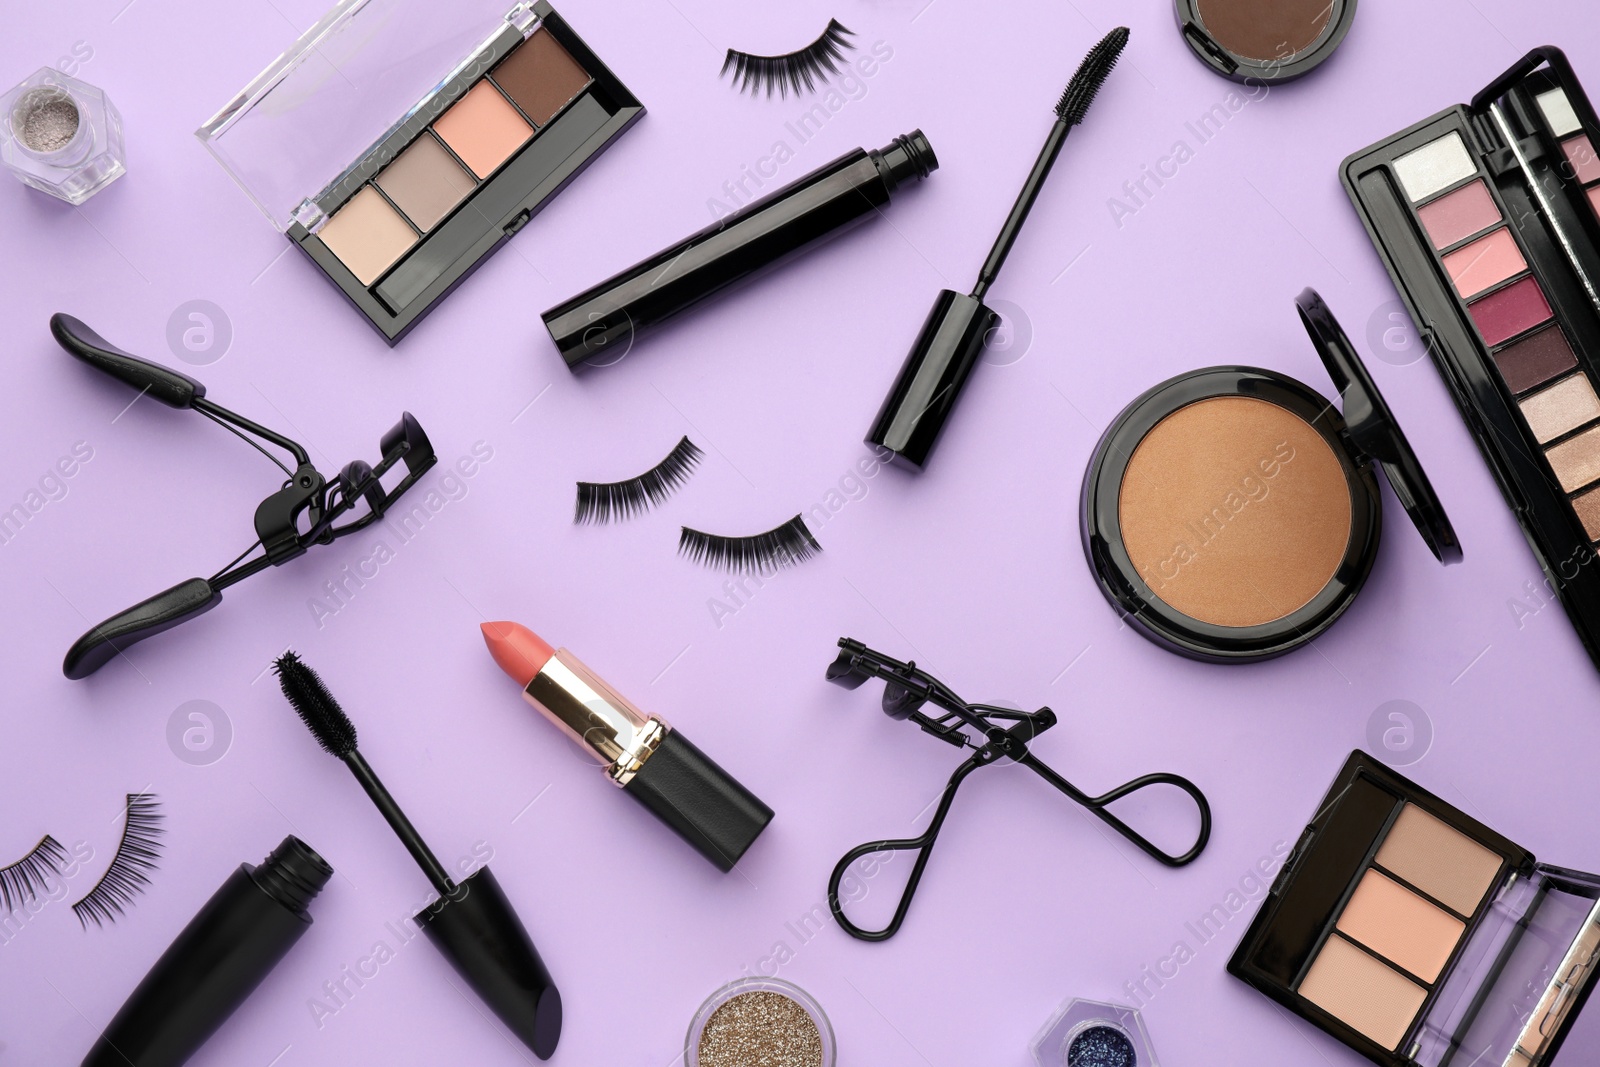 Photo of Eyelash curlers and makeup products on violet background, flat lay